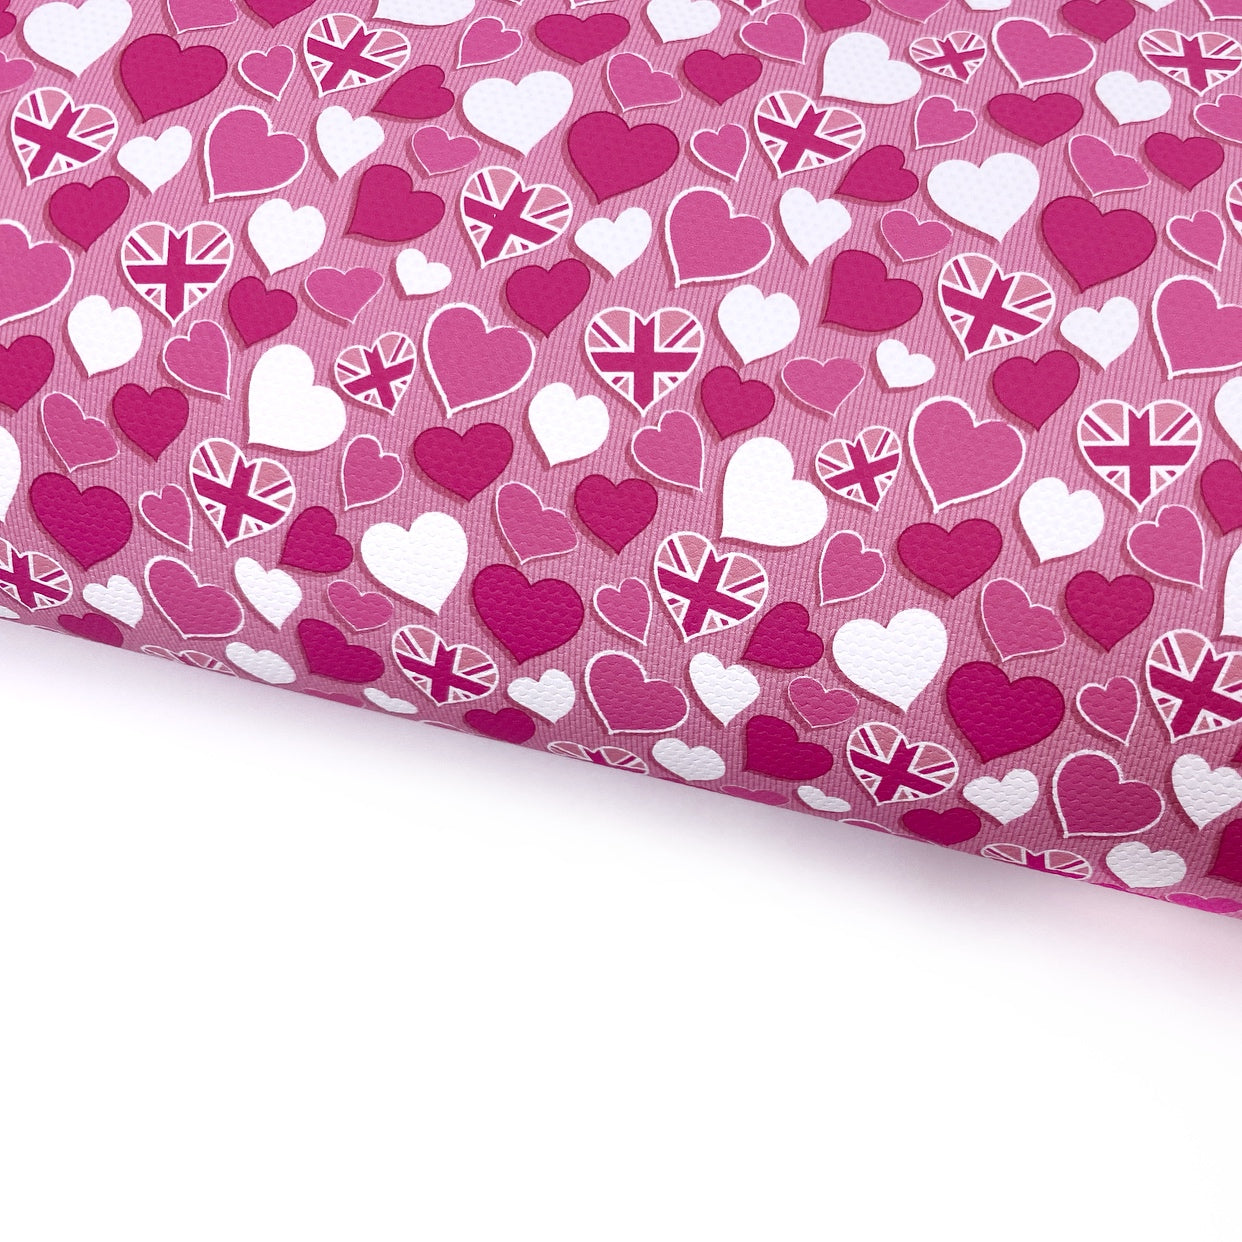 We love the UK Pink Lux Premium Printed Bow Fabric